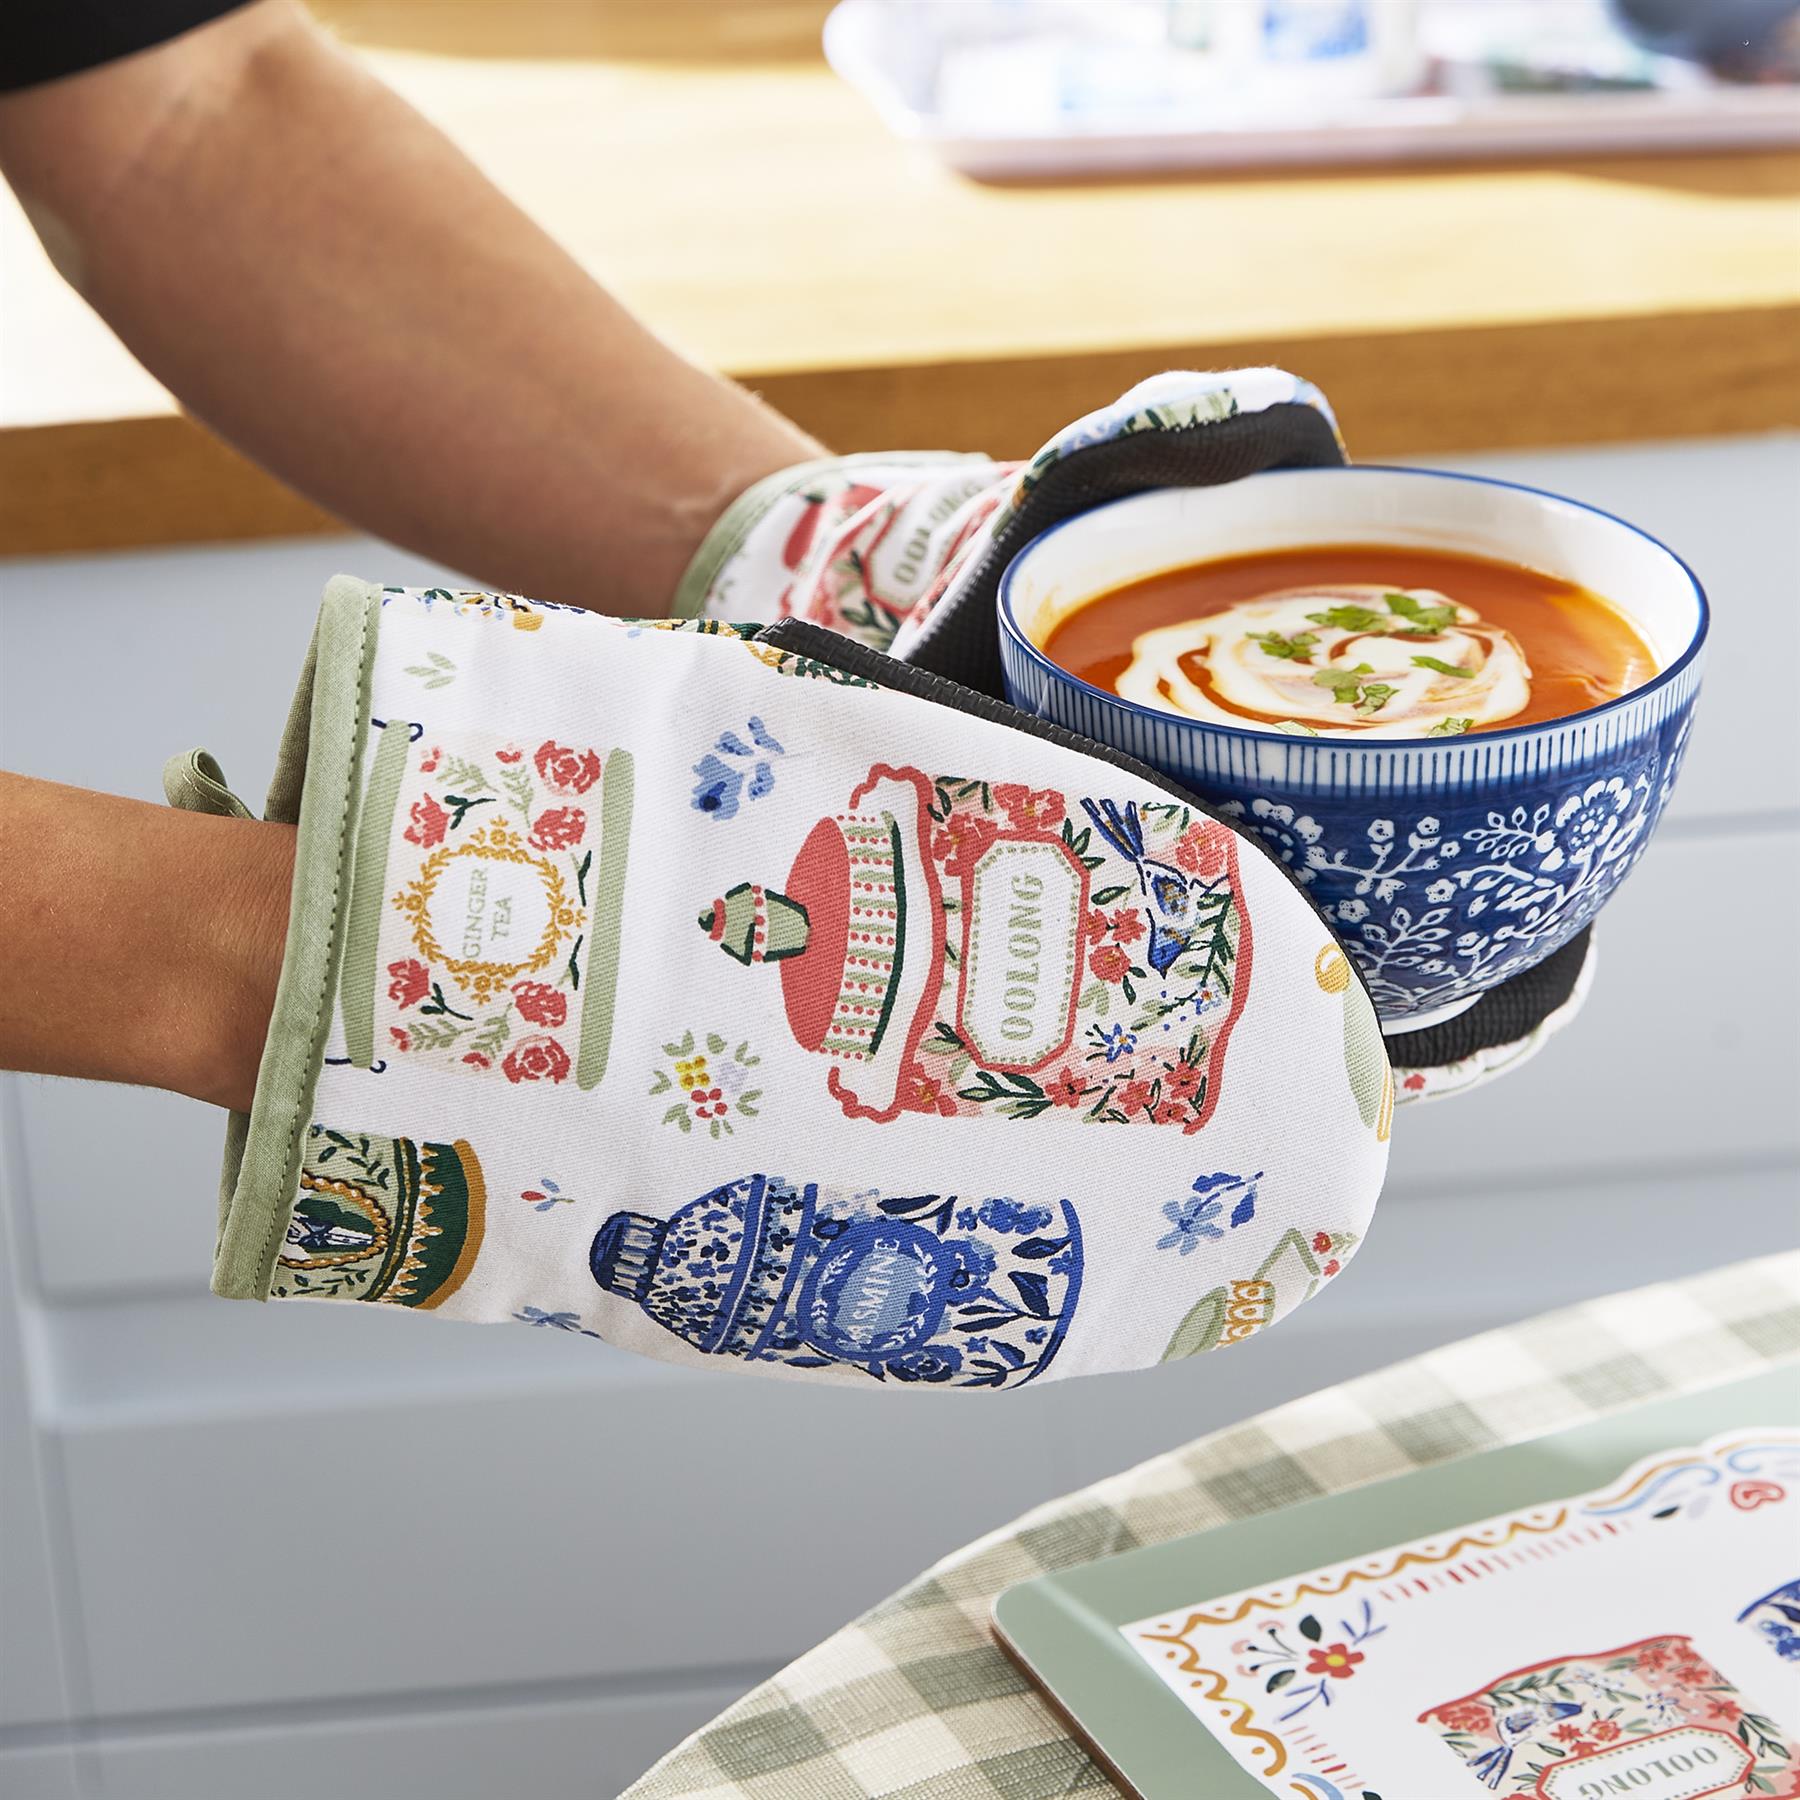 Ulster Weavers Tea Tins Microwave Mitts - Pair One Size in Multi - Micro Mitts - Ulster Weavers